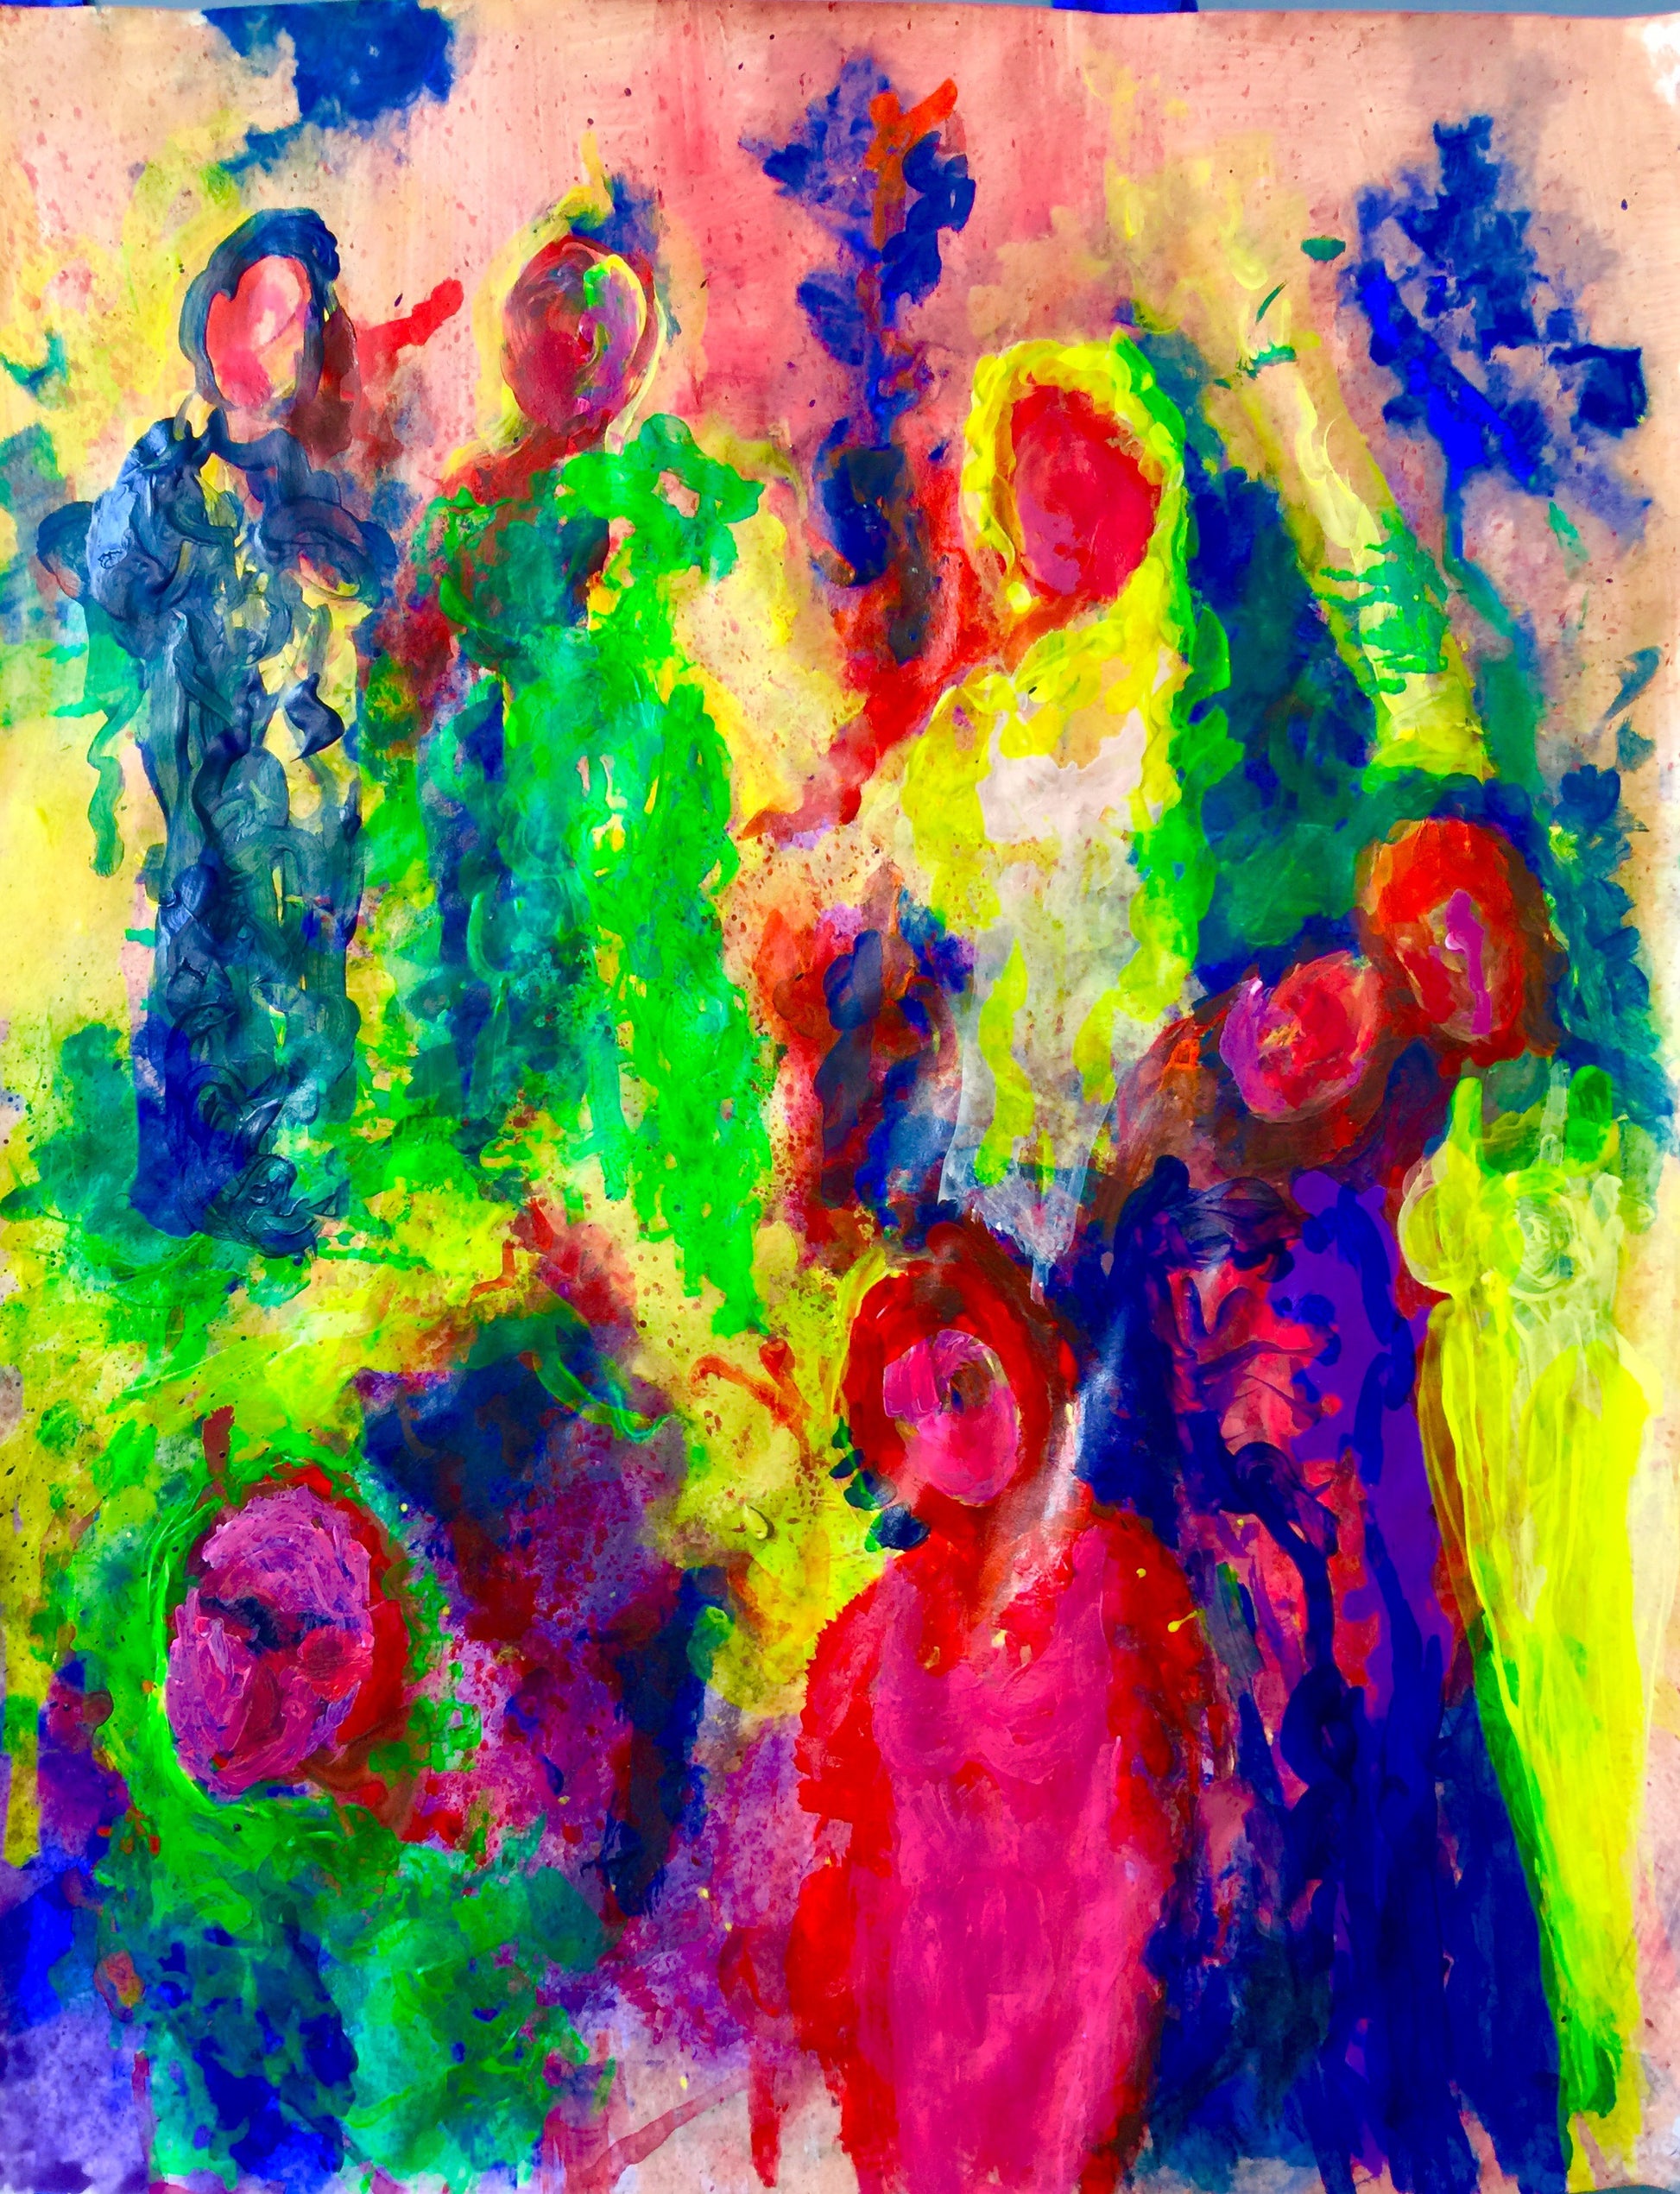 Congregation III - Sonarta.com Congregation III is dedicated to all the women,  who have paved the way for my generation to have these amazing opportunities in our life time.  This is an Acrylic on Paper painted by Shahla Rahimi Reynolds. It is 24” H. X 19" W.